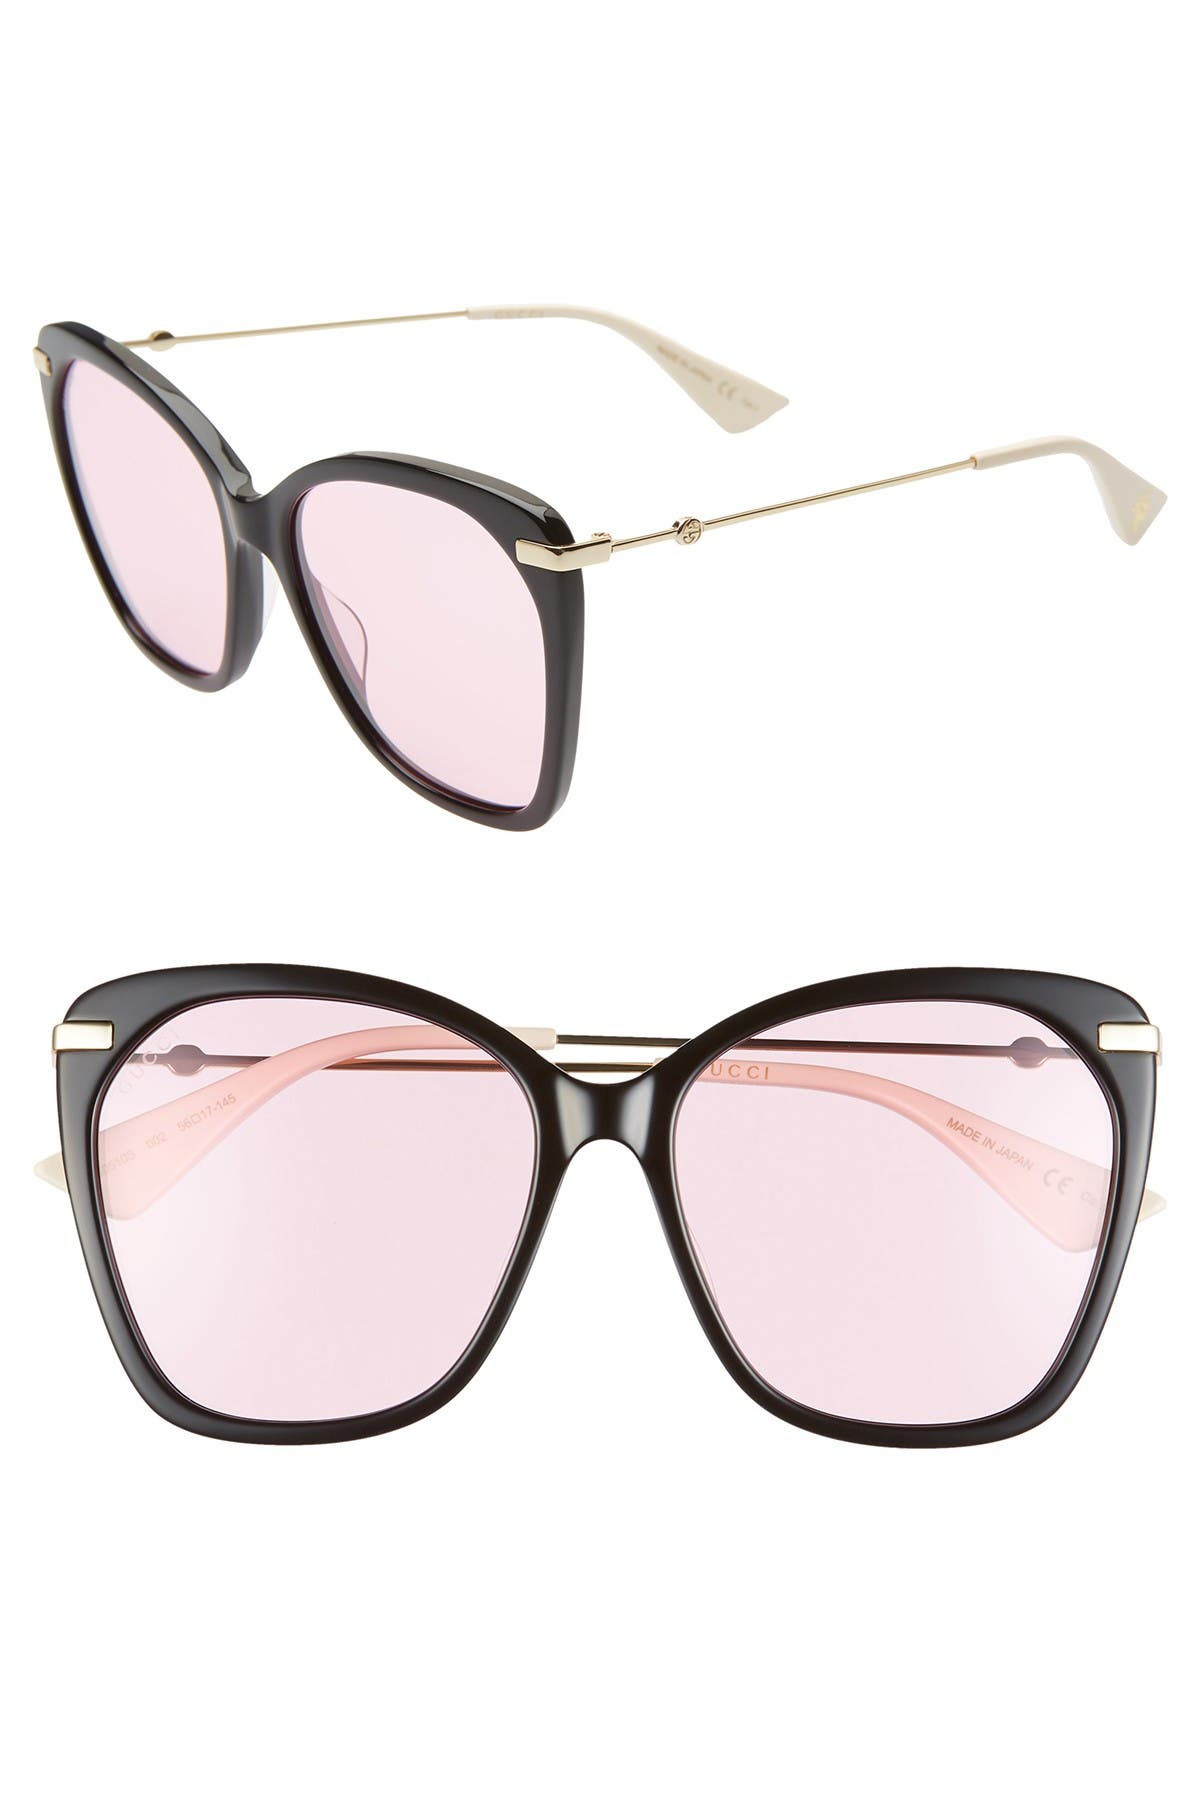 Gucci 56mm Butterfly Sunglasses In Black